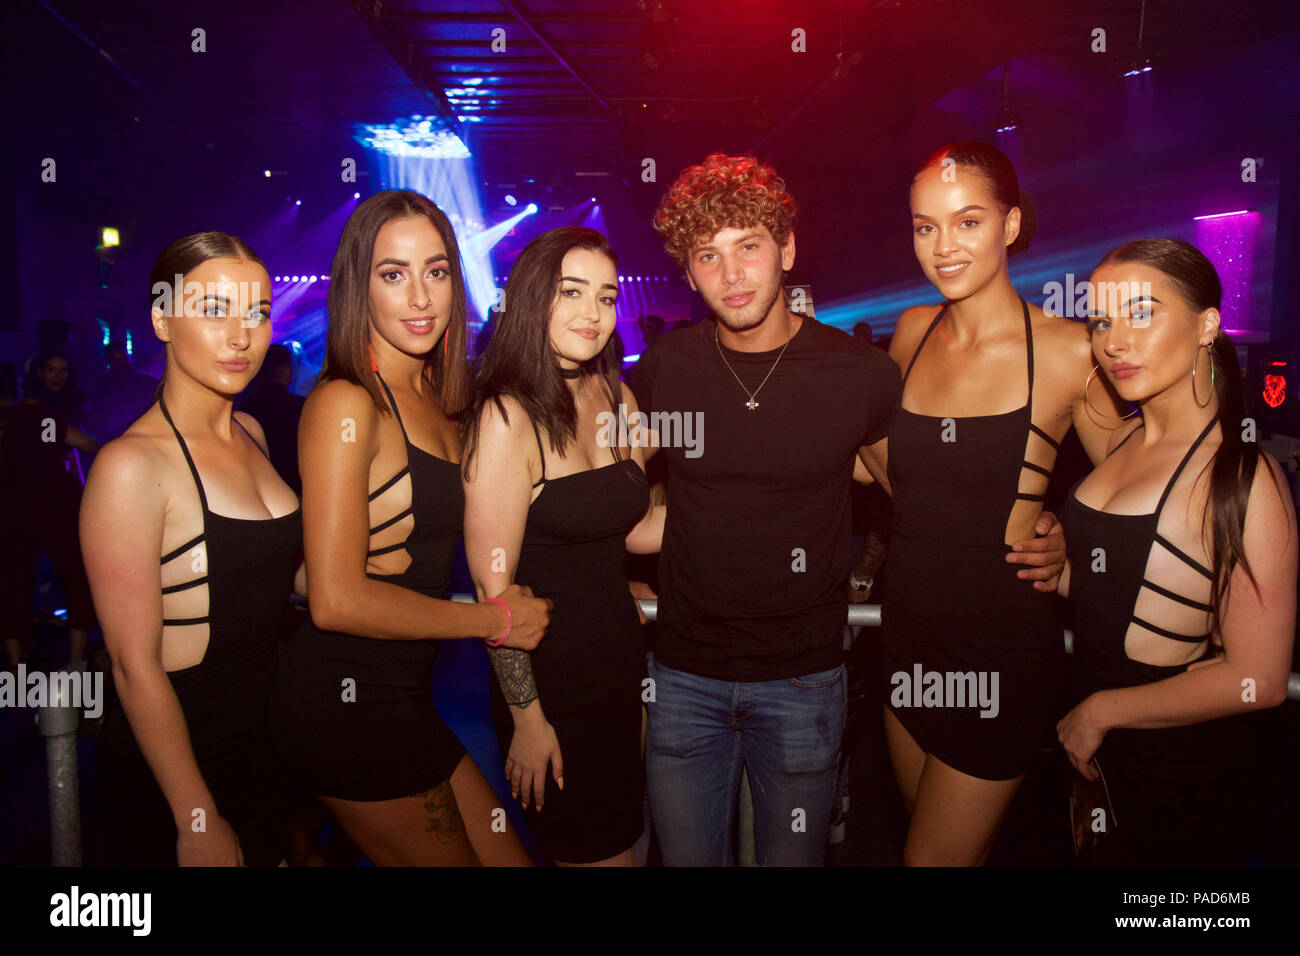 Watford, UK. 21st July, 2018. Love Island star Eyal Booker enjoys a night out with friends as he parties in the VIP section at Hydeout 2.0 nightclub in Watford, UK. He wasn't short of female attention with hoardes of girls queing up to chat to and get a photo with him - as well as flirt. One girl in particular who hung out with Eyal and his friends was a dead ringer for chart topper Rihanna. The boys bought several bottles of spirits sharing drinks around as they partied. Eyal said he wants to keep his partying to a minimum as there are other things he would like to focus on since his Love Isl Stock Photo